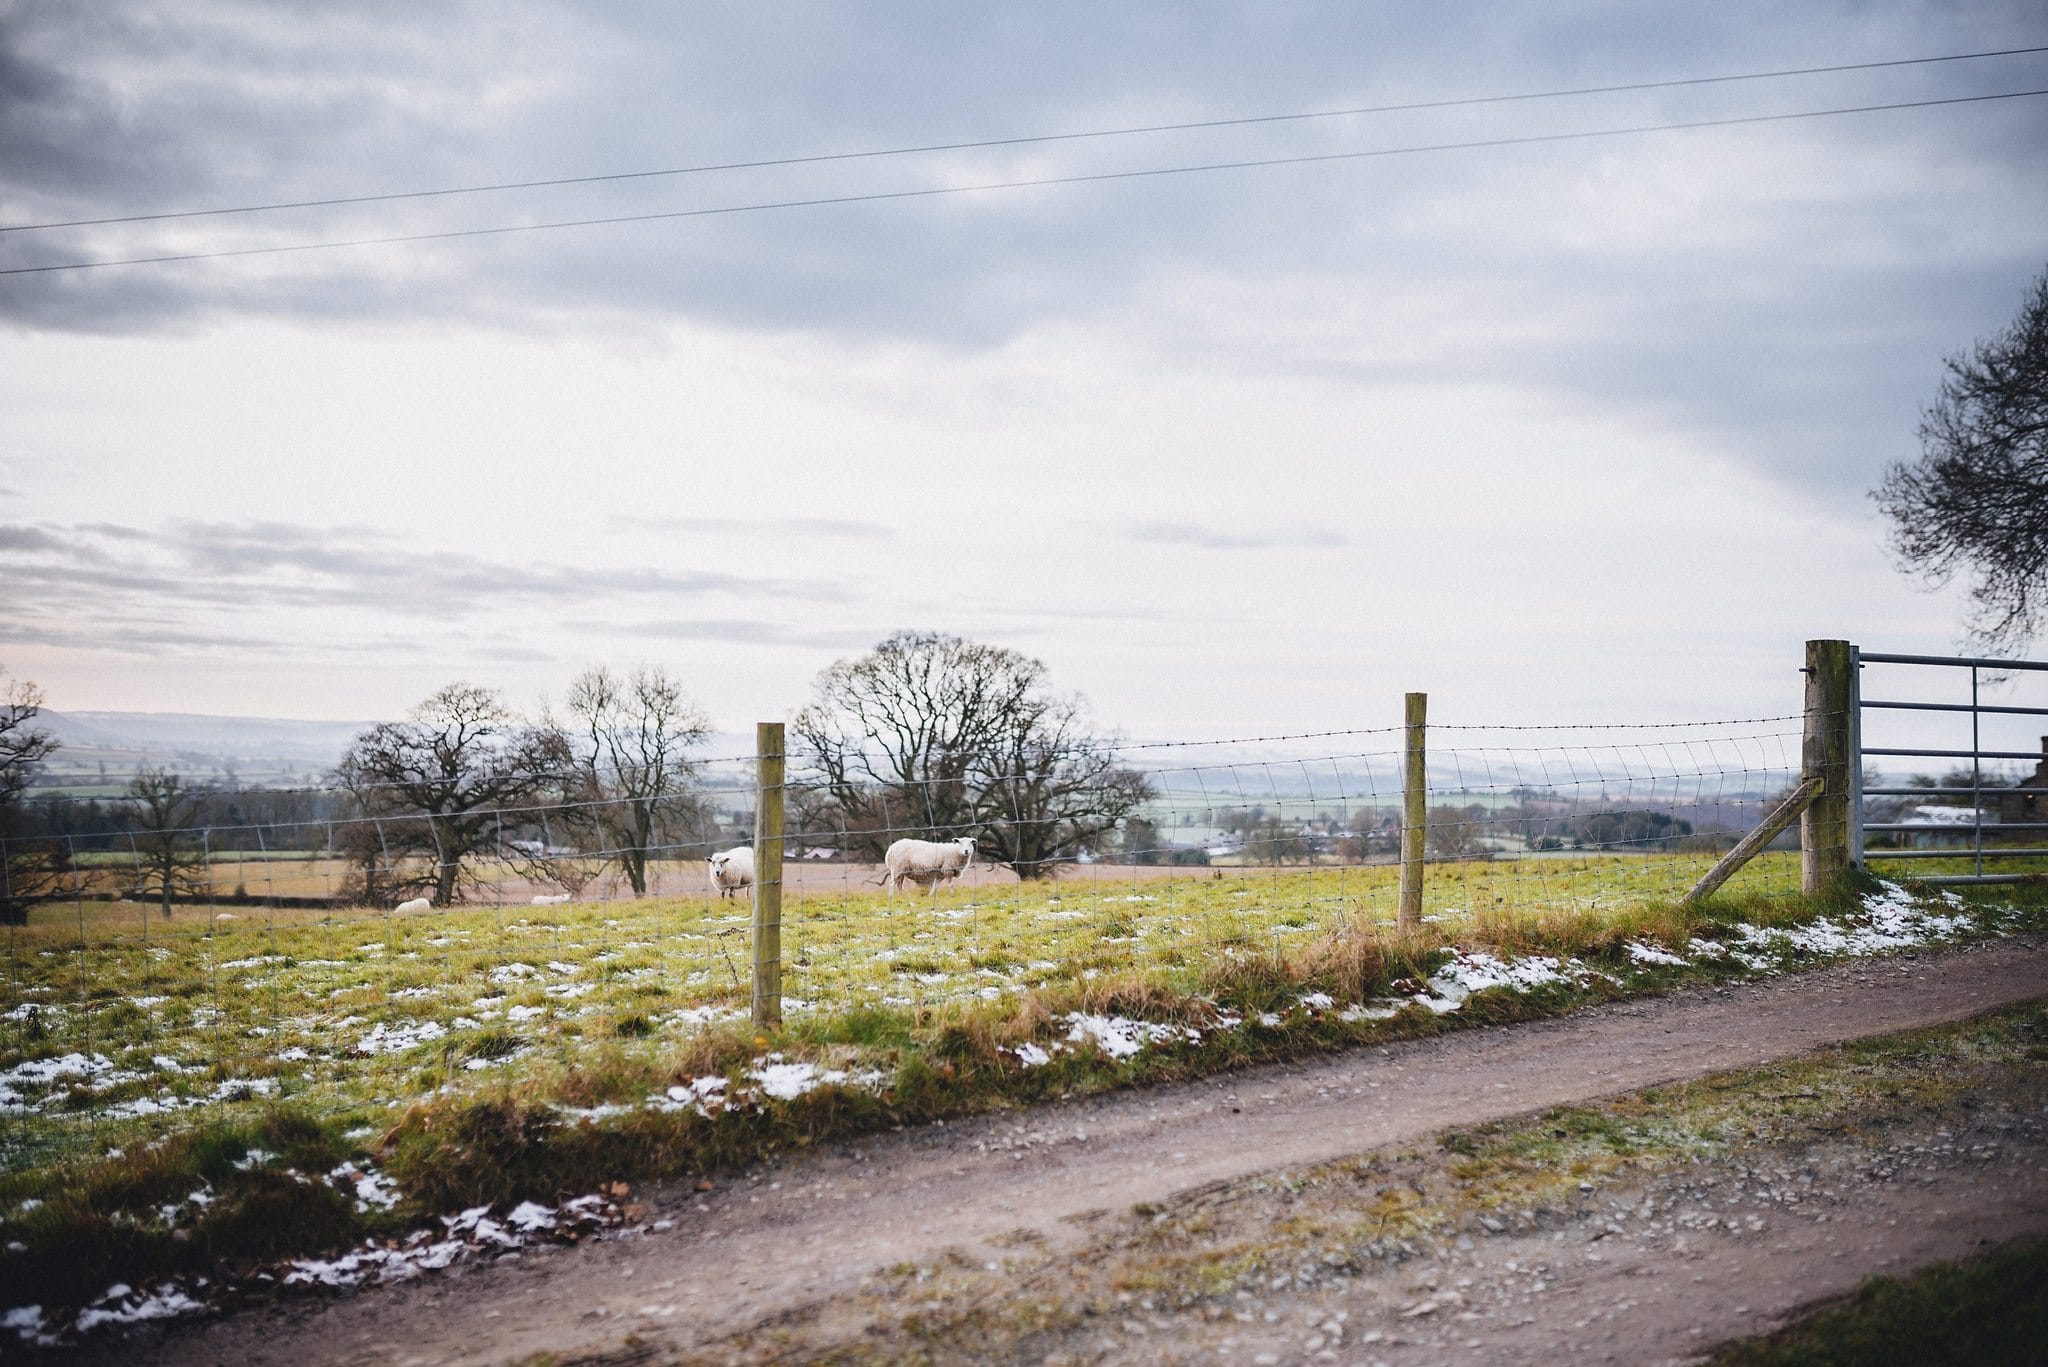 Patches of snow and ice on the ground in the fields for this December wedding